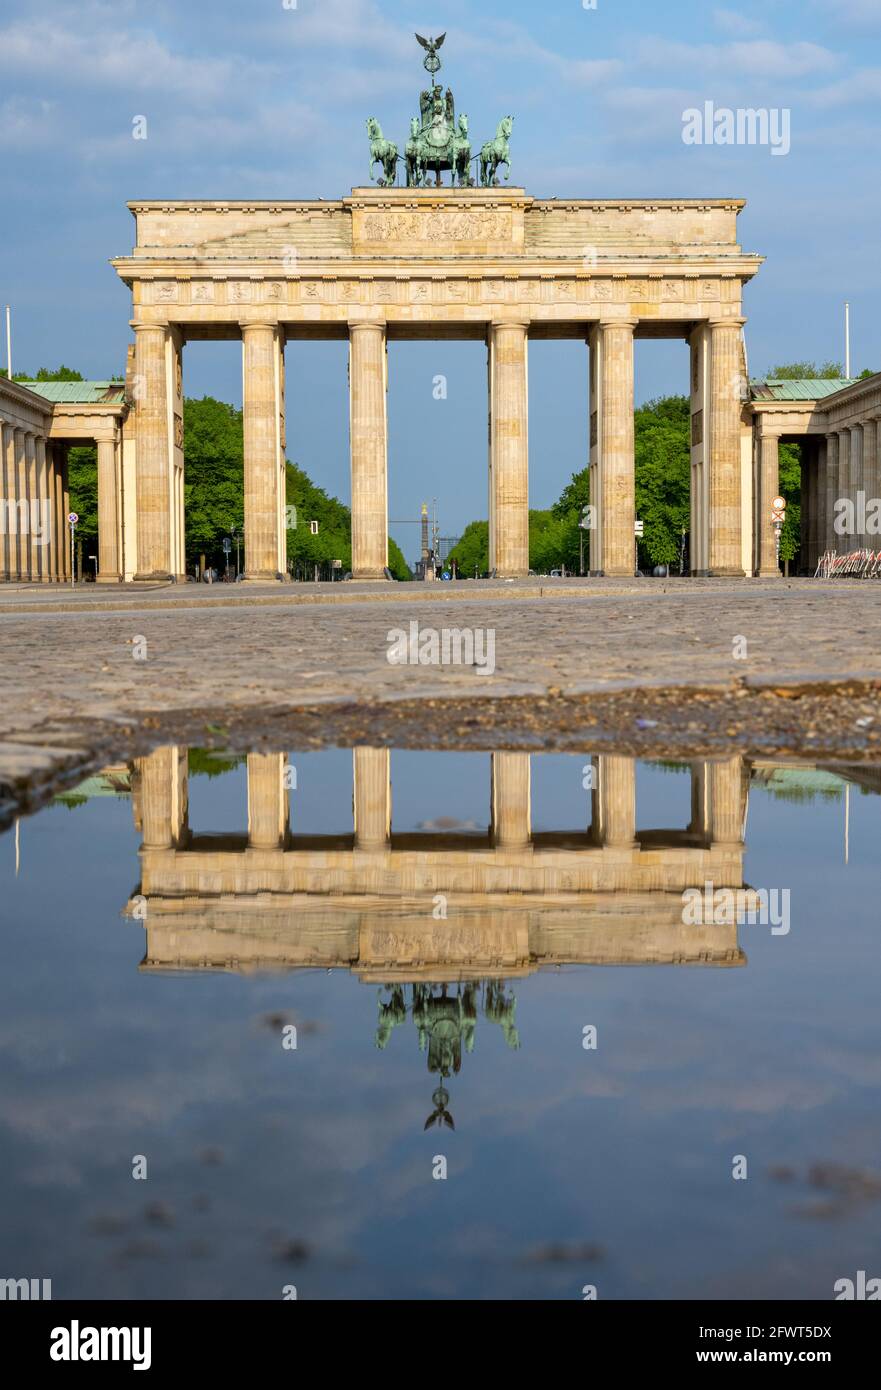 The famous Brandenburger Tor in Berlin with no people reflected in a puddle Stock Photo